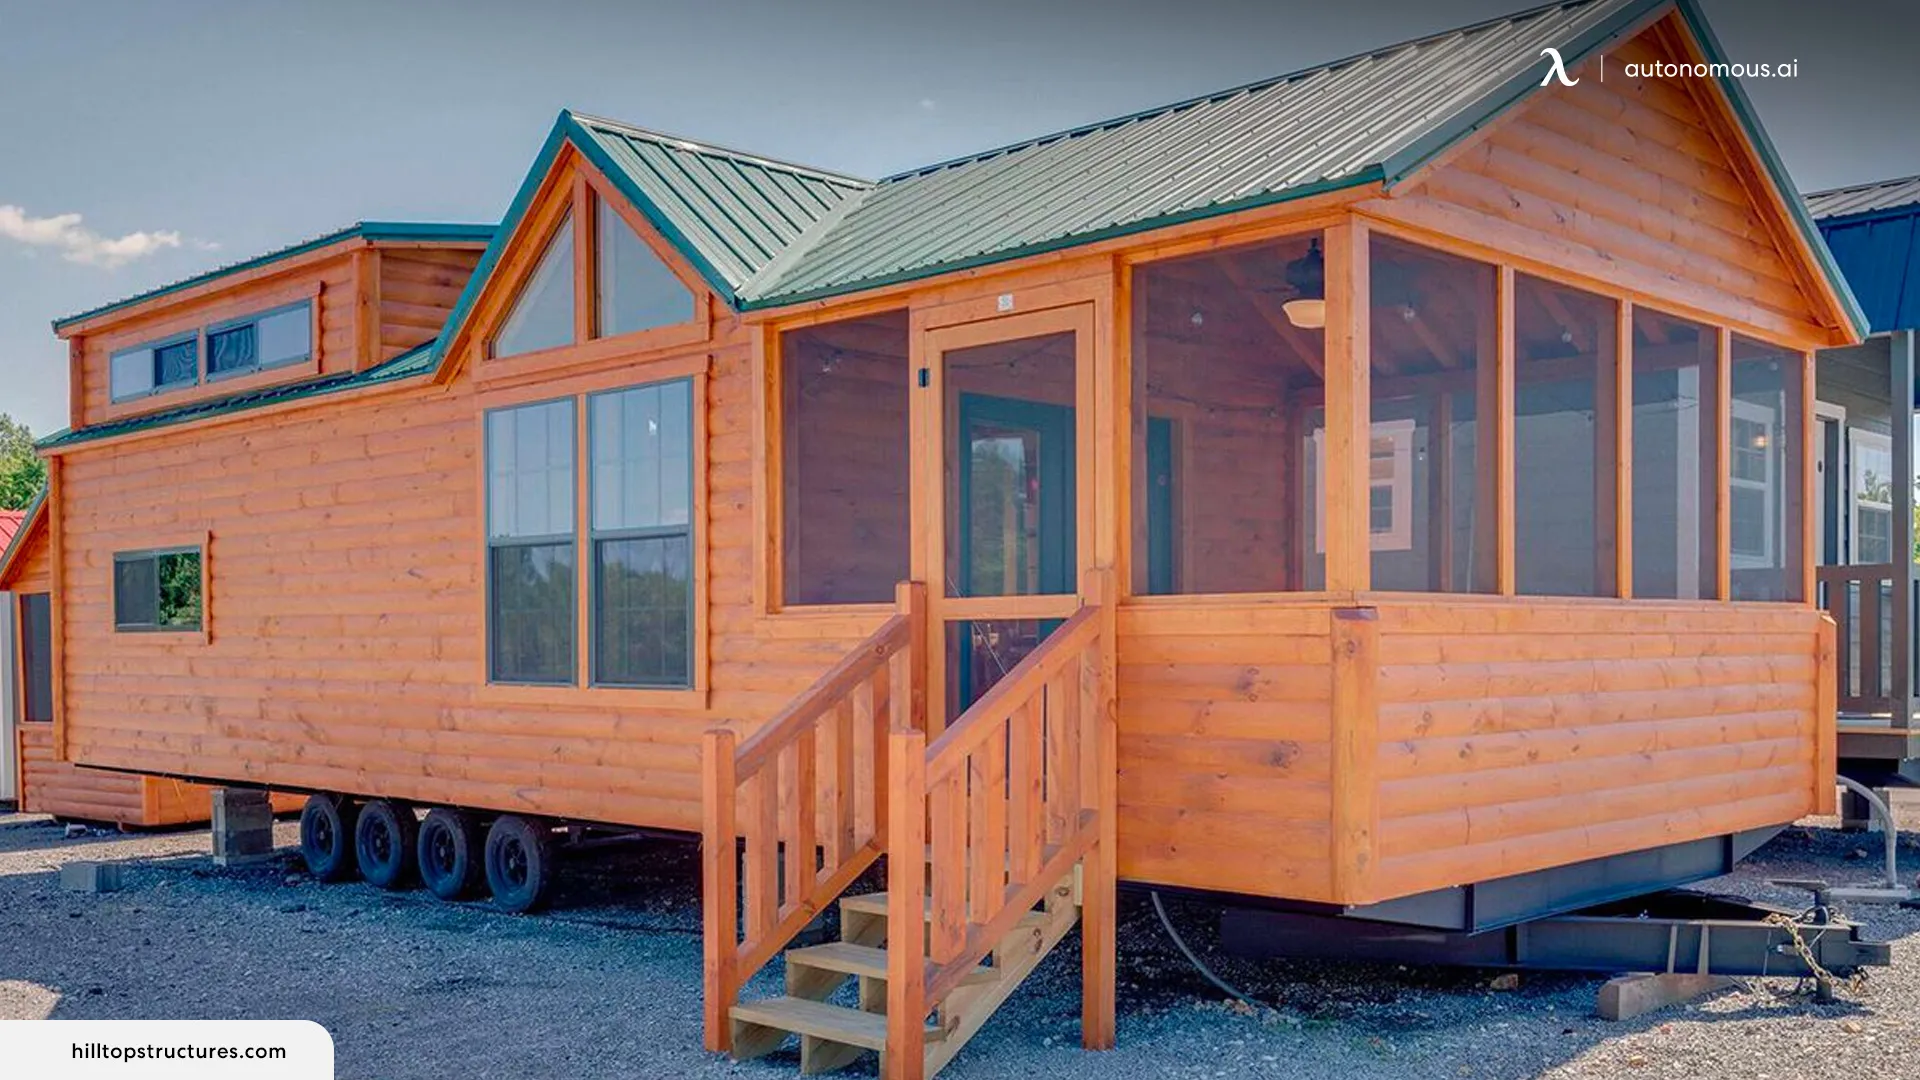 Do I need a permit for a tiny home on wheels in California?